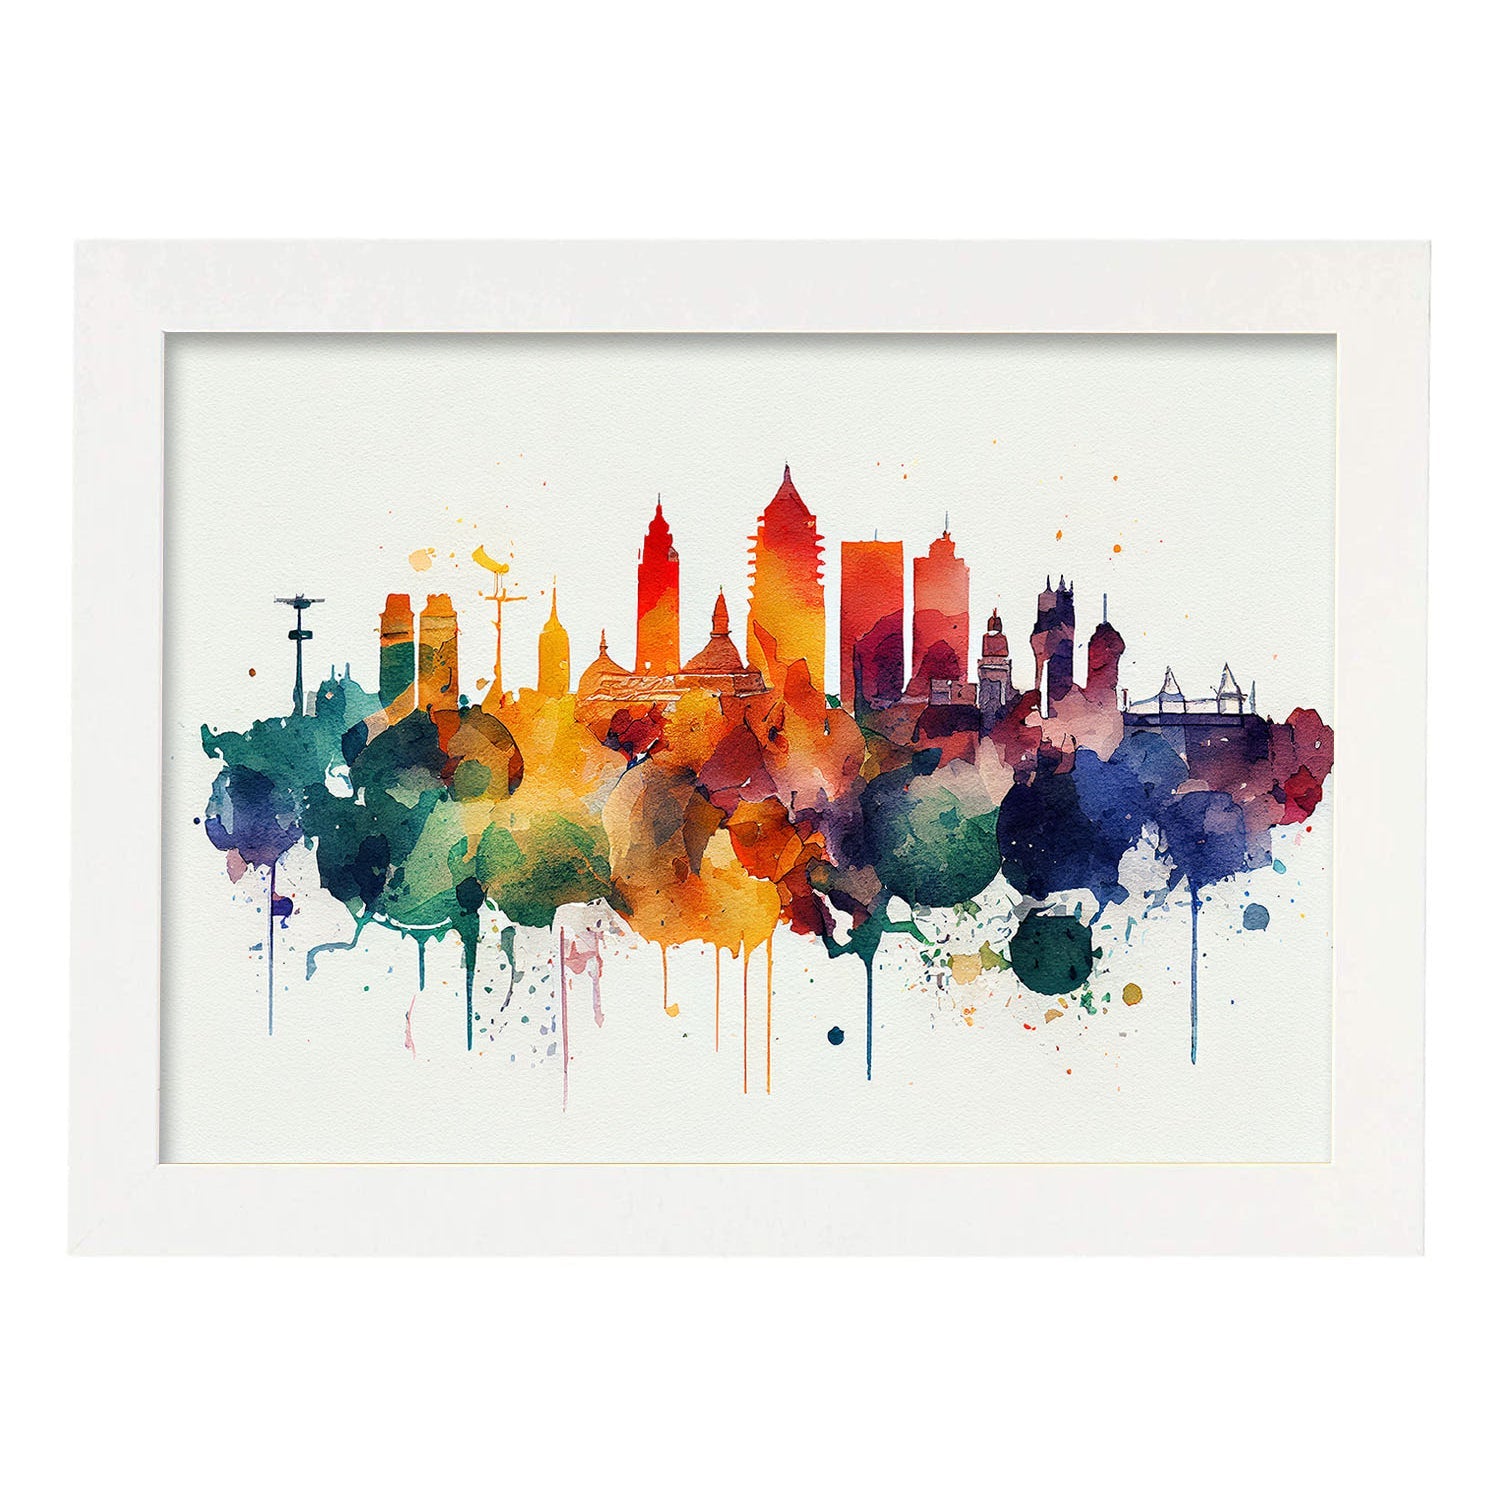 Nacnic watercolor of a skyline of the city of Madrid_1. Aesthetic Wall Art Prints for Bedroom or Living Room Design.-Artwork-Nacnic-A4-Marco Blanco-Nacnic Estudio SL